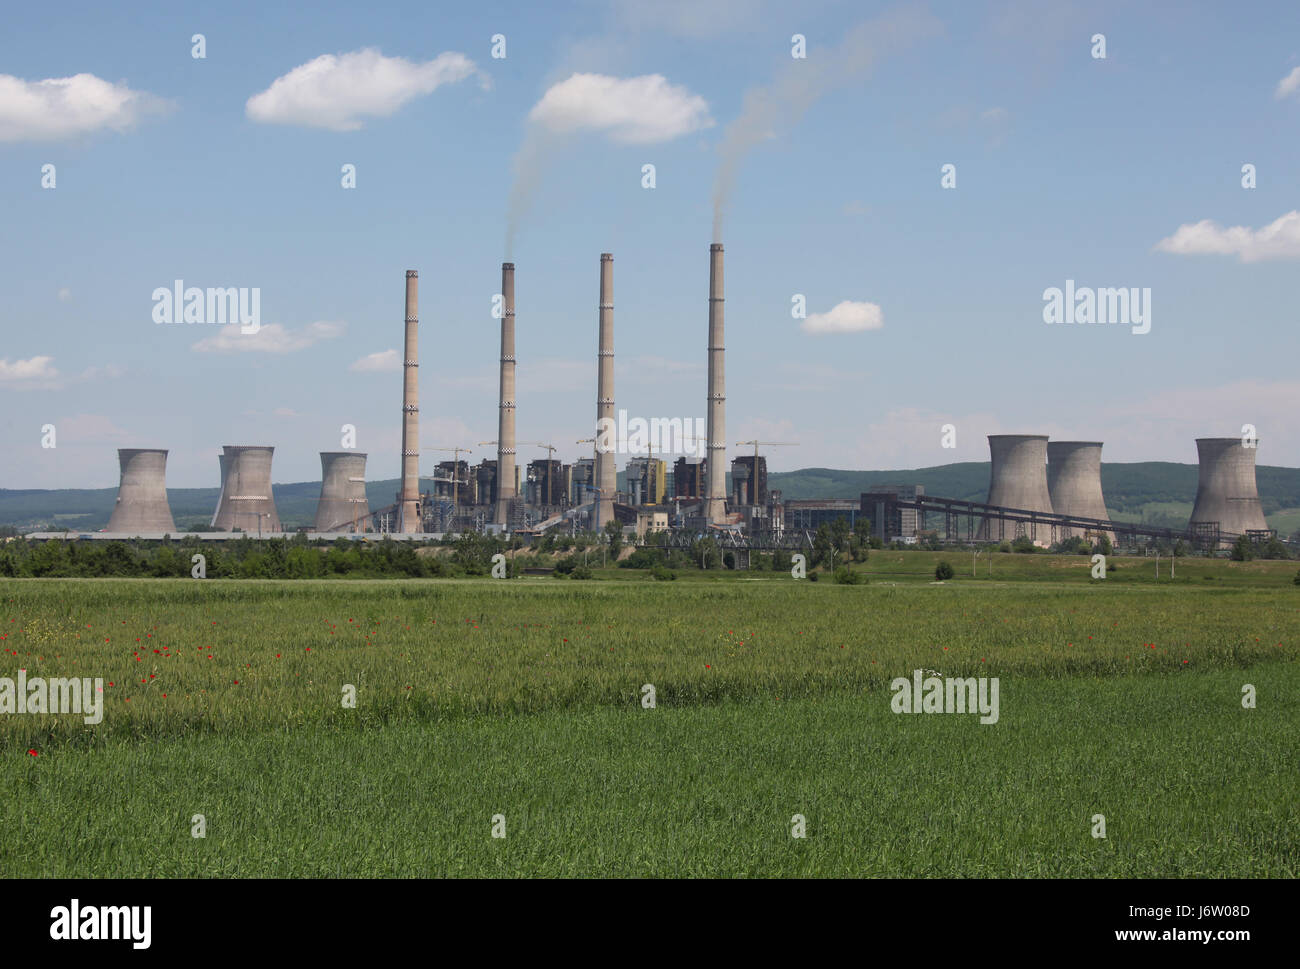 Co2 Schleuder High Resolution Stock Photography and Images - Alamy